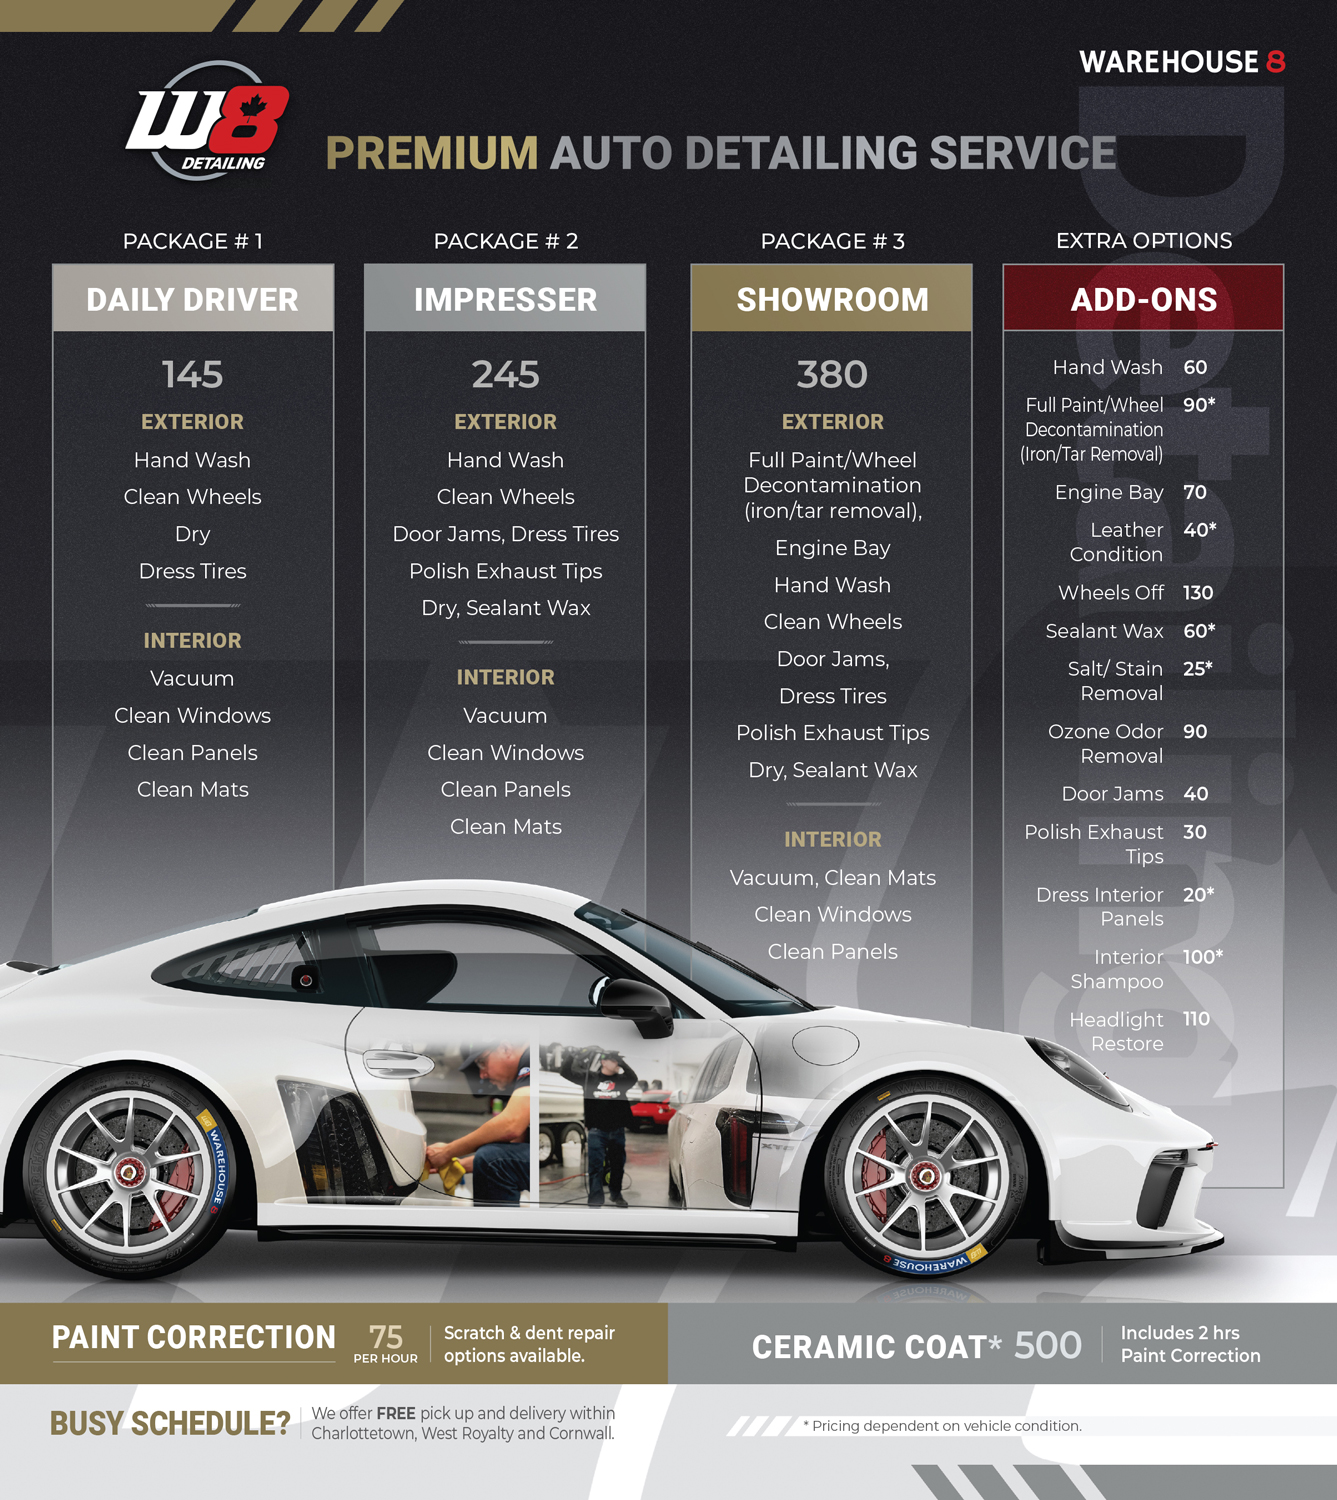 Warehouse 8 detailing packages pricing